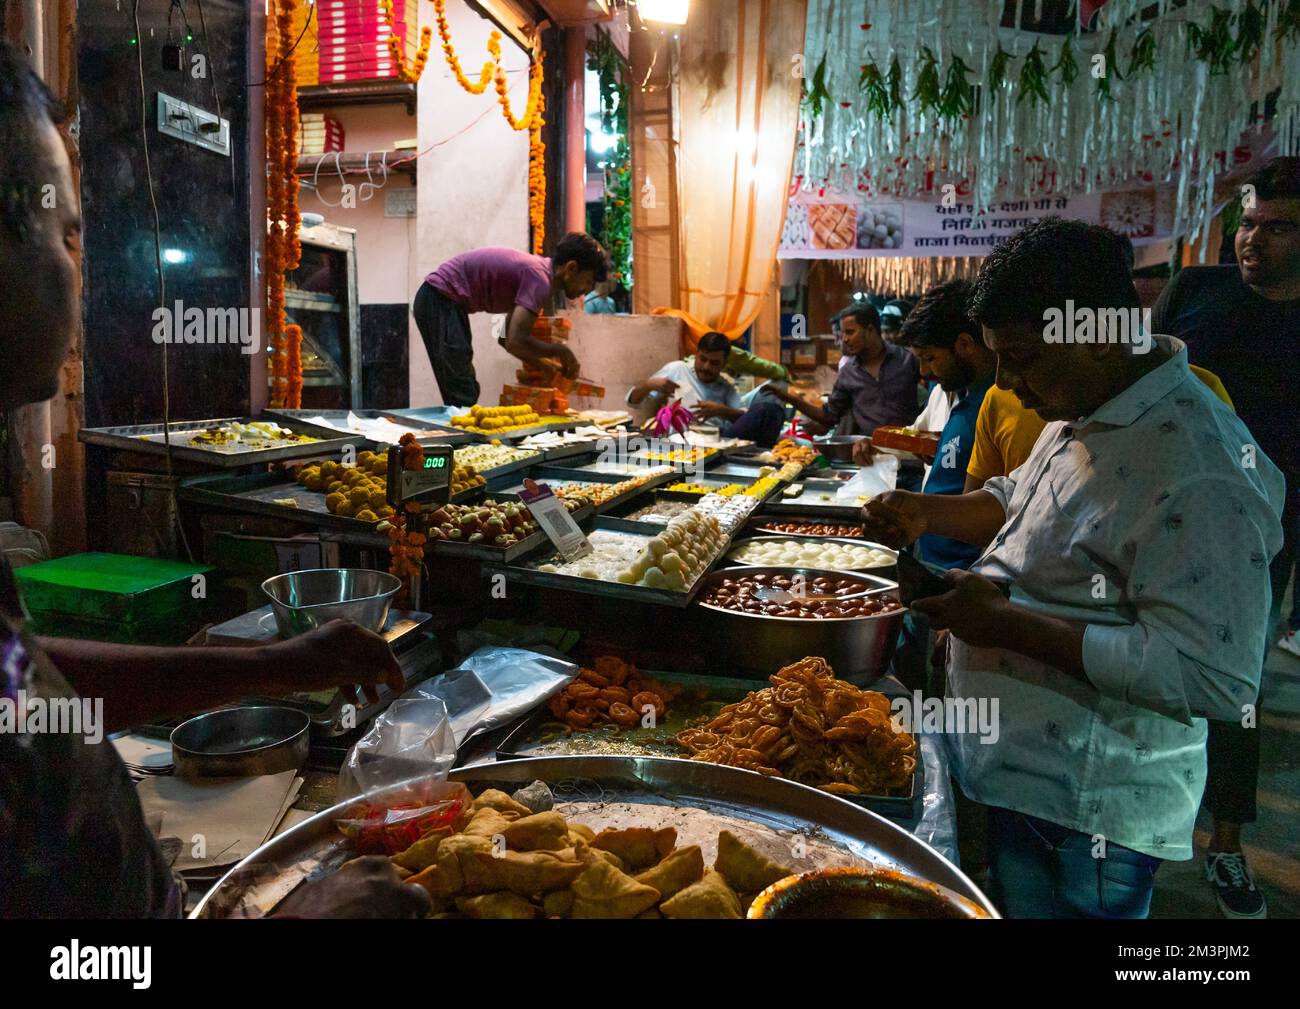 Indian cakes for sale during Diwali festival, Rajasthan, Jaipur, India Stock Photo